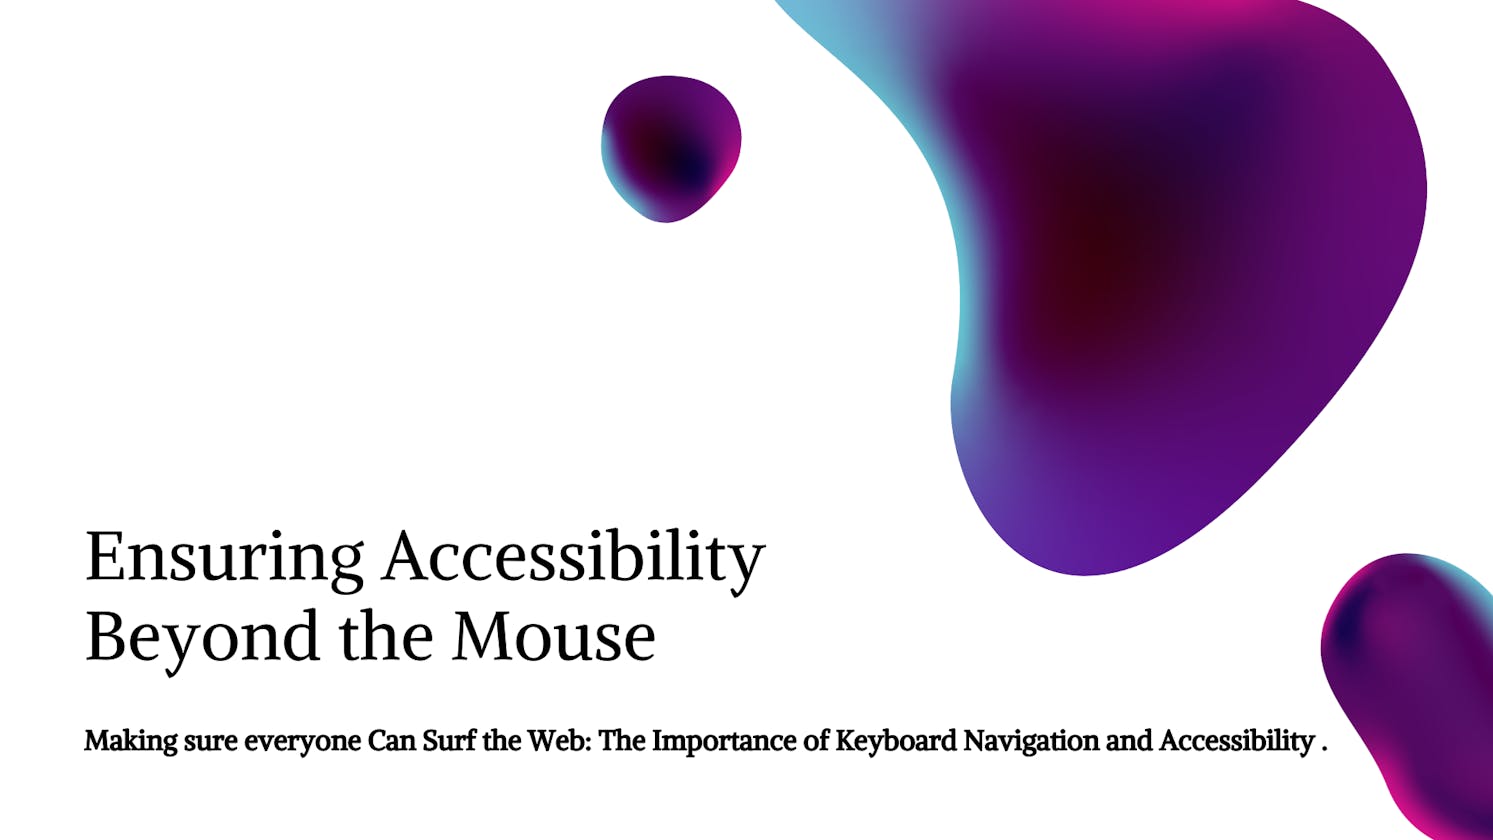 Ensuring Accessibility Beyond the Mouse